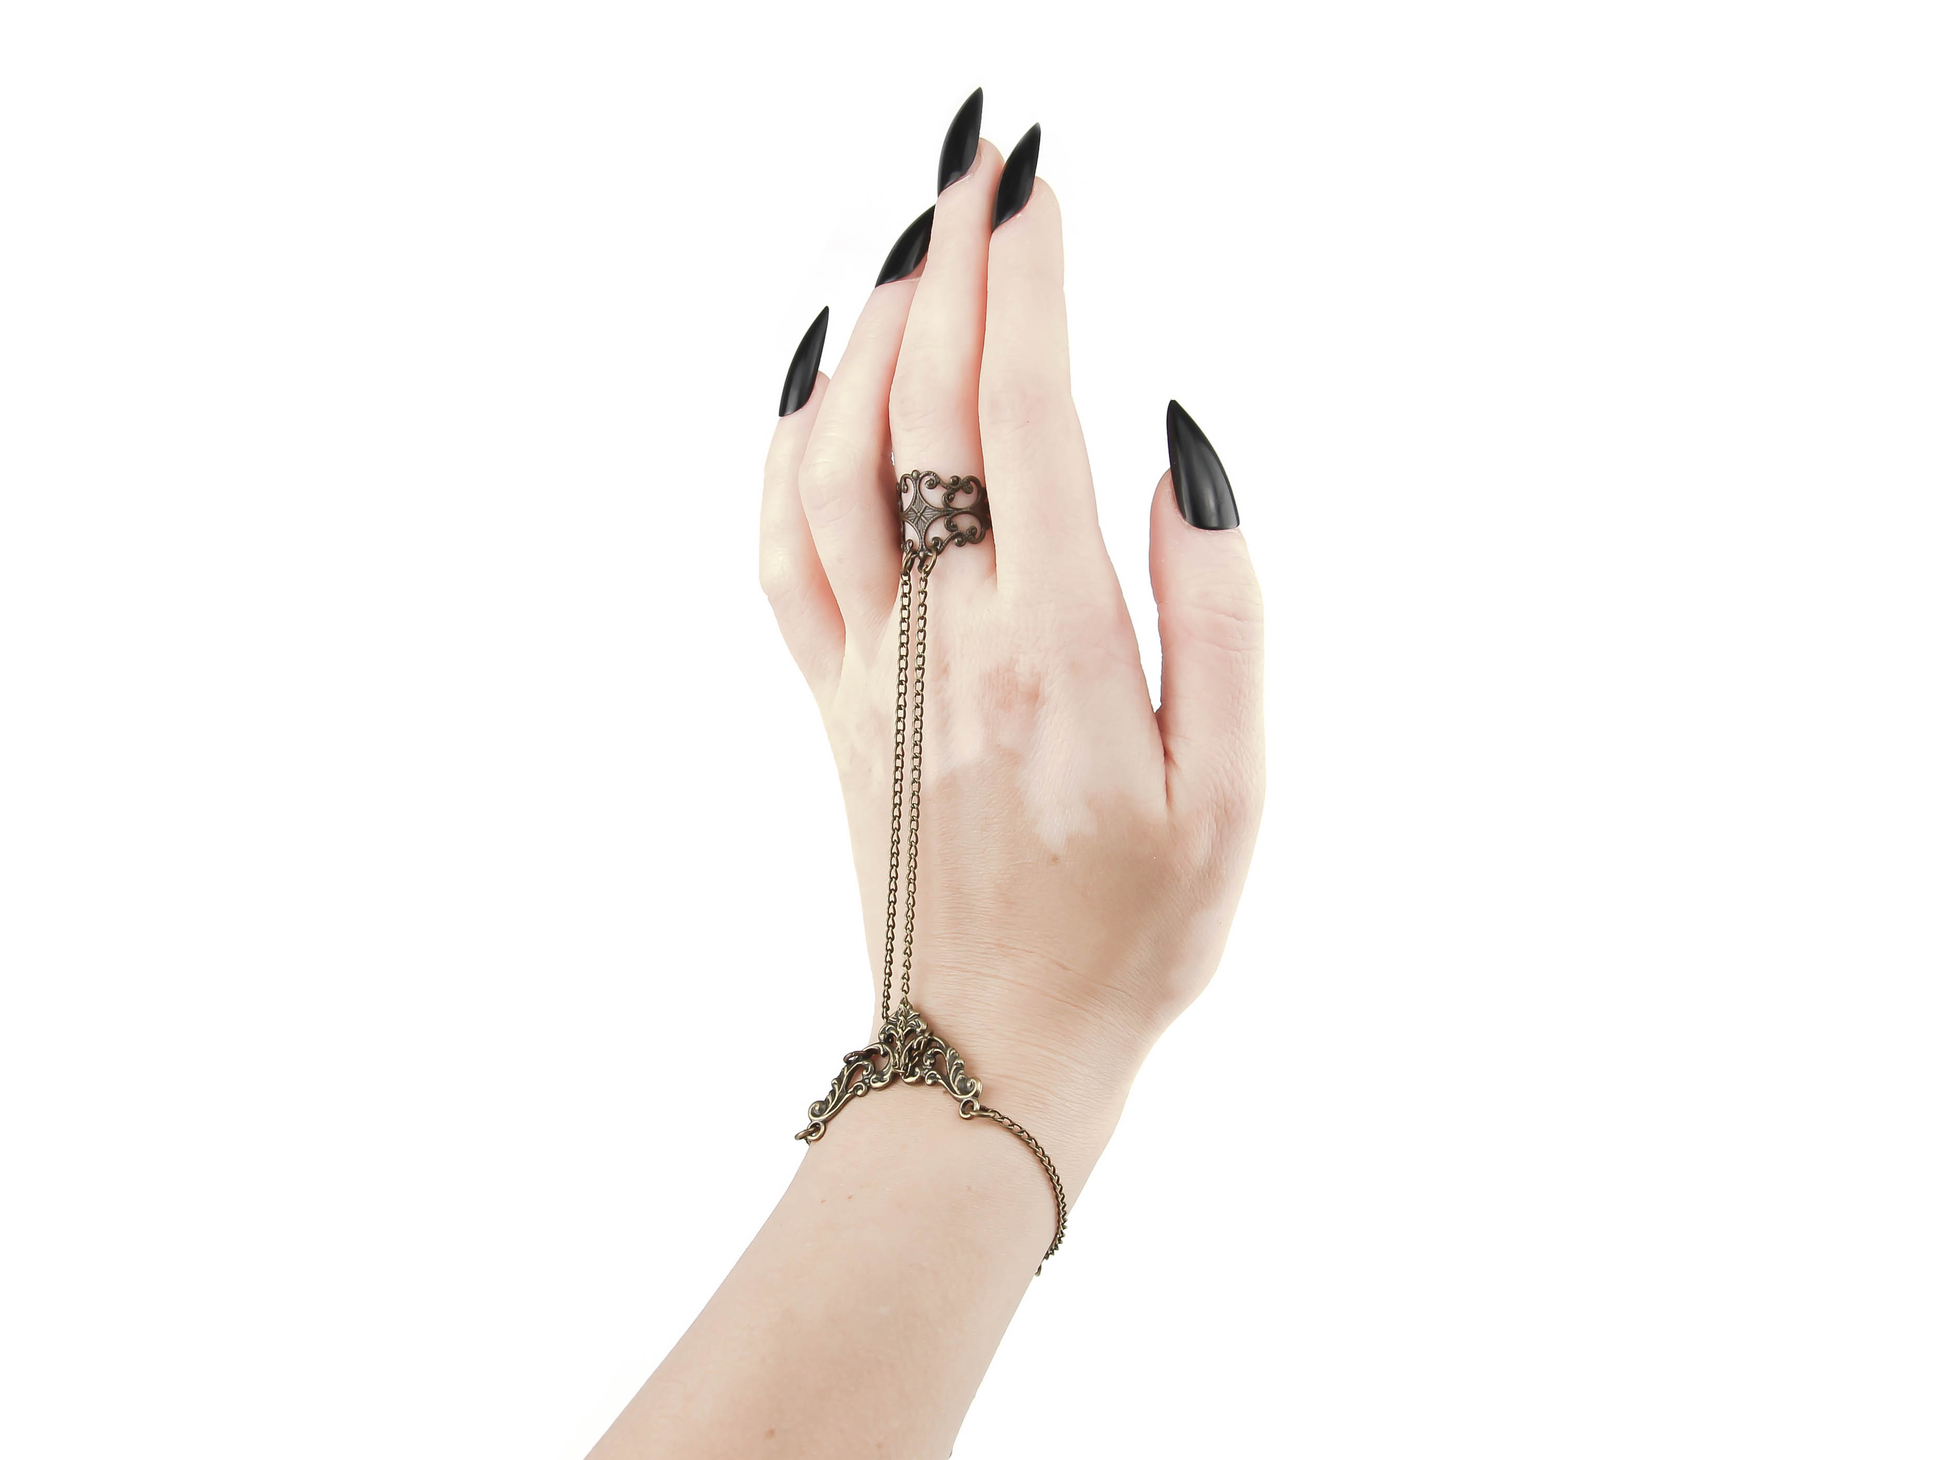 Elegant hand adorning a Myril Jewels hand chain bracelet ring, showcasing delicate bronze filigree detailing symbolic of Neo Gothic artistry. The bracelet, part of a dark avant-garde collection, embodies gothic-chic style, making it a perfect accessory for Halloween, everyday wear, or as a statement piece at rave parties and festivals. It's designed for those who appreciate Whimsigoth and Witchcore aesthetics or seek to enhance their minimal goth attire.